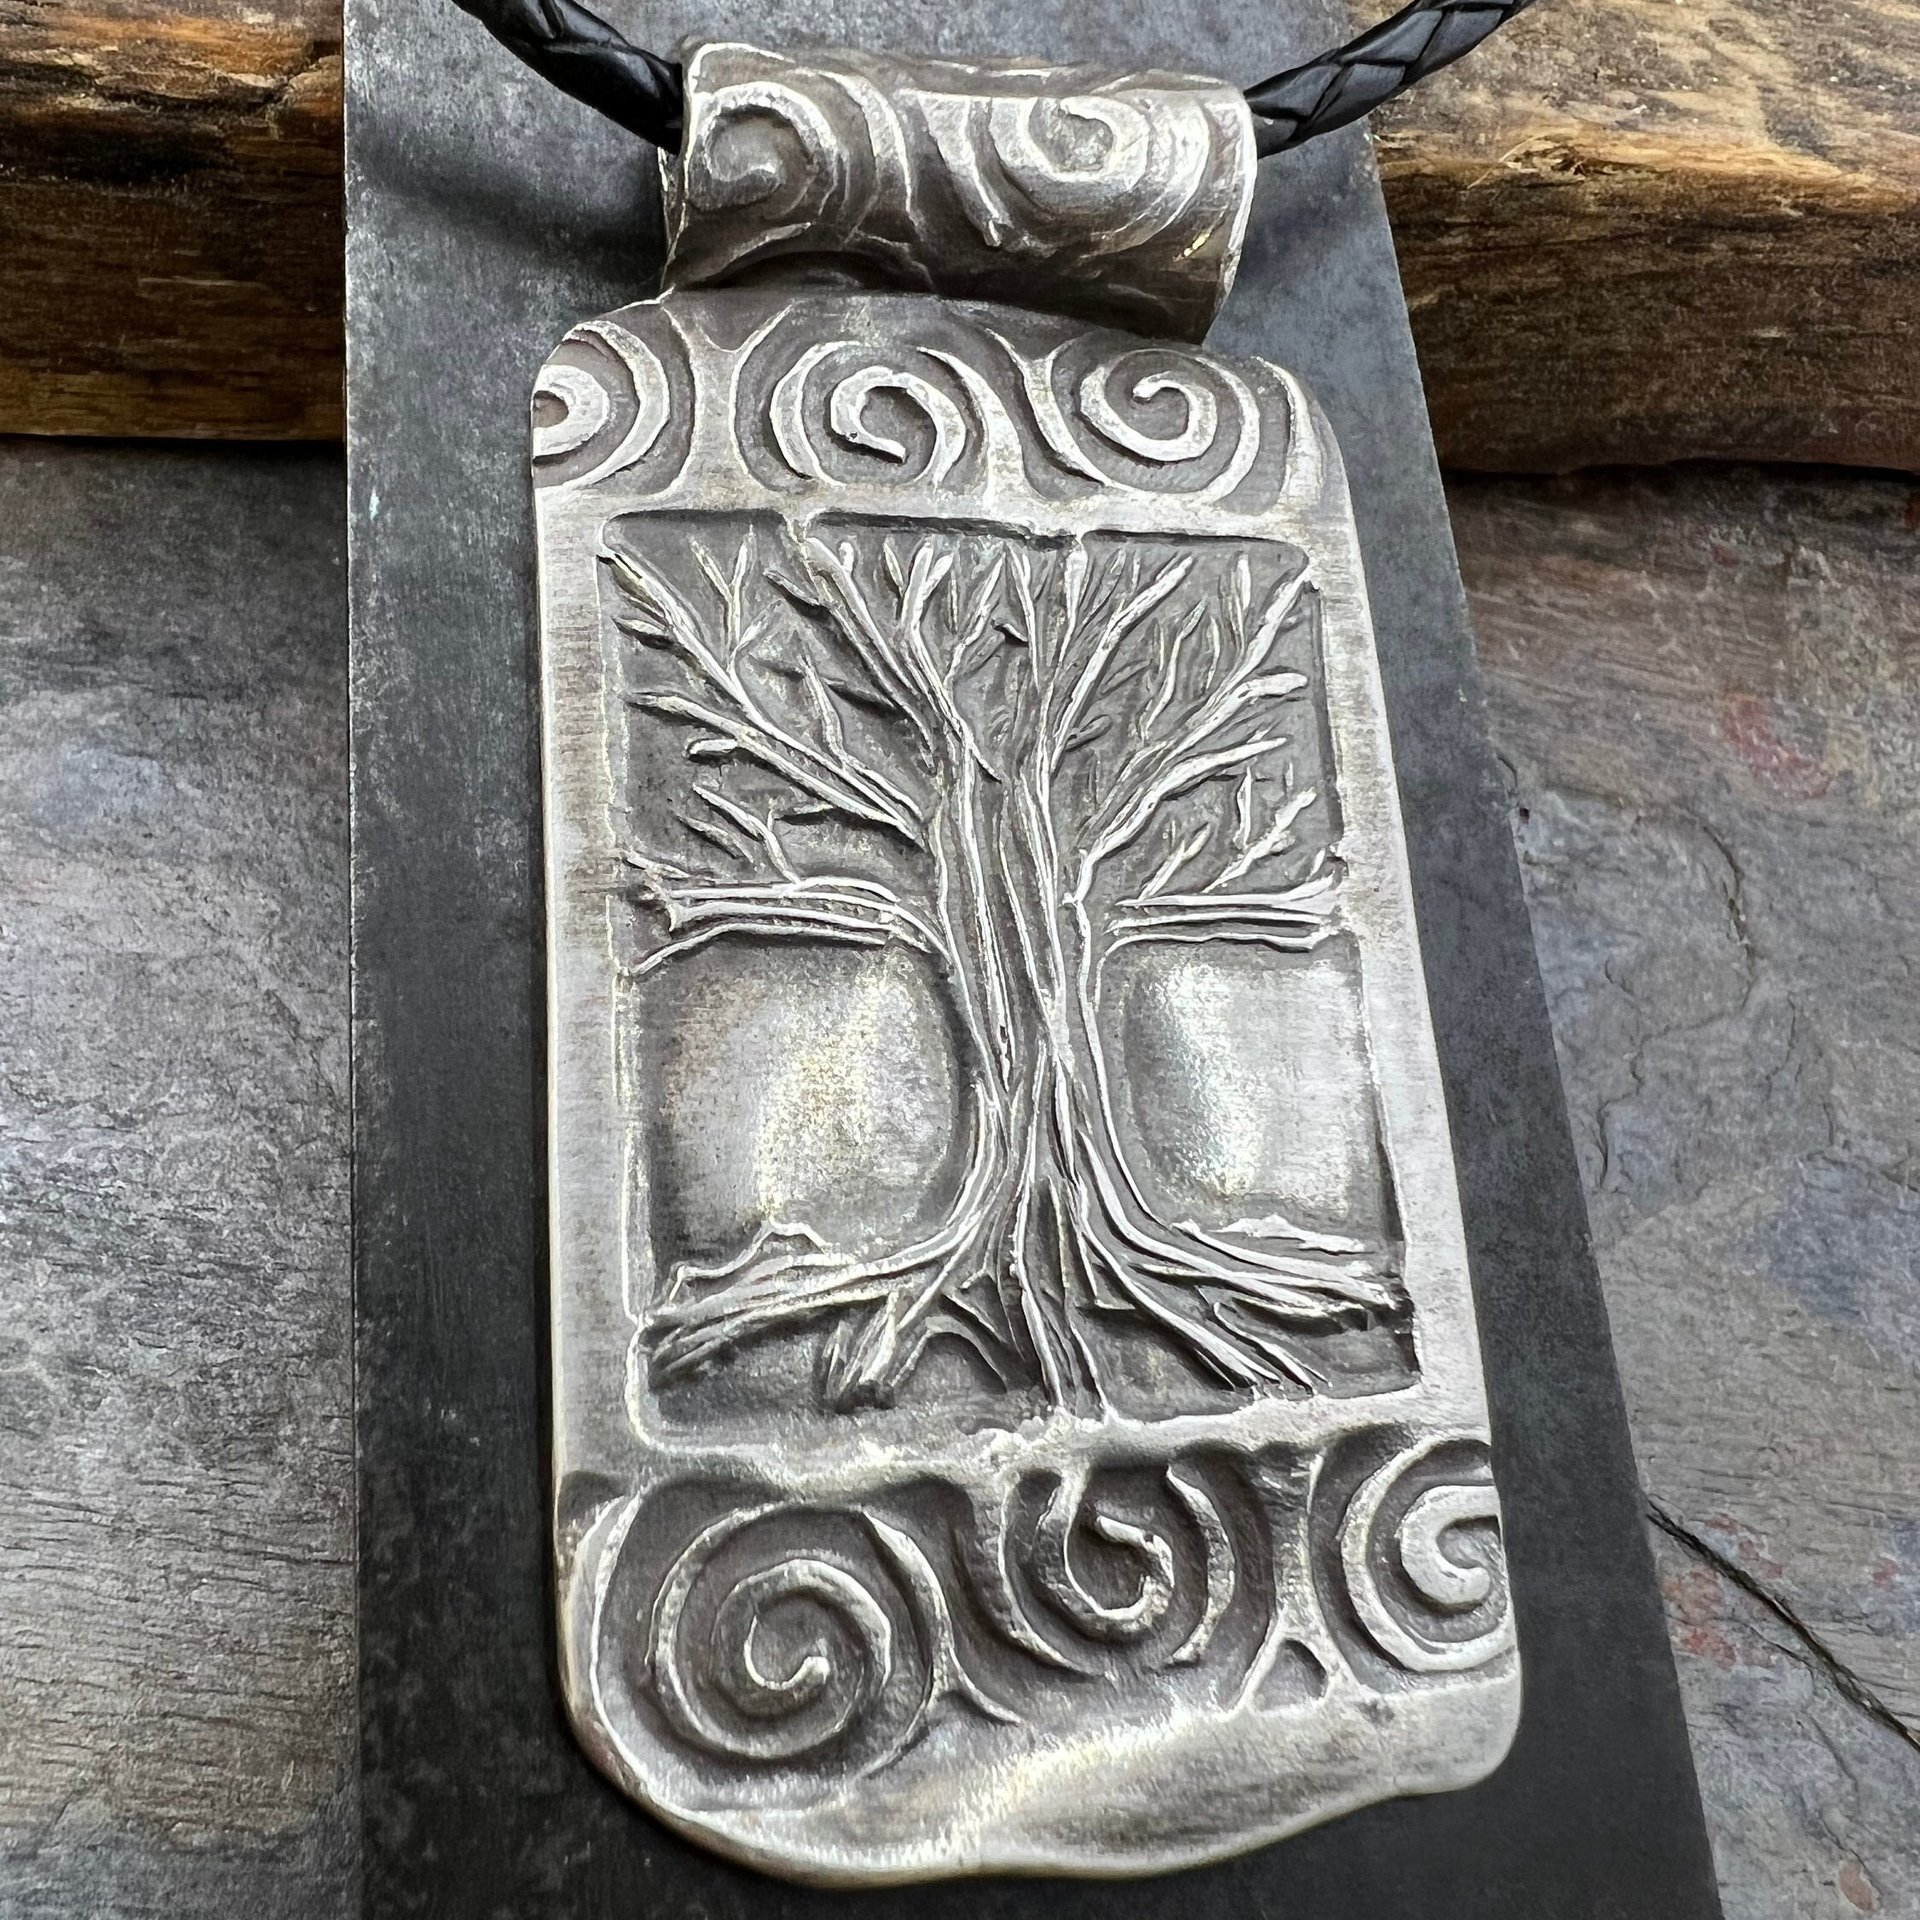 Tree of Life Pendant, Sterling Silver Tree Necklace, Irish Celtic Jewelry, Pagan Celtic Witch, Druid Sacred Trees, Celtic Spirals, Handmade